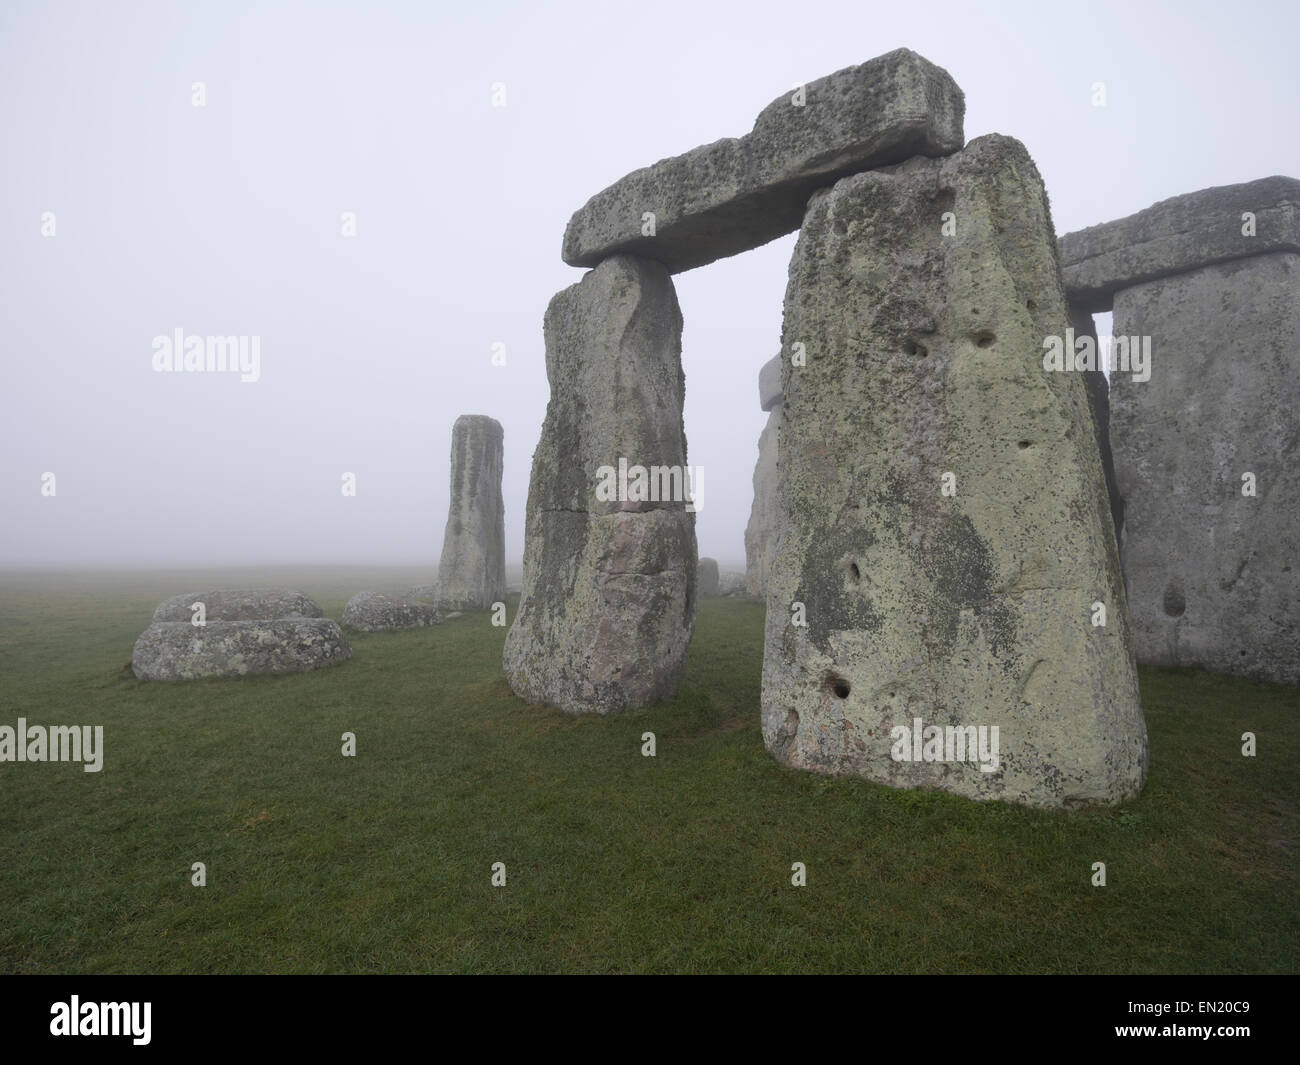 Dawn and Mist at Stonehenge, prehistoric monument of standing stones, Wiltshire, England. UNESCO World Heritage Site. Stock Photo